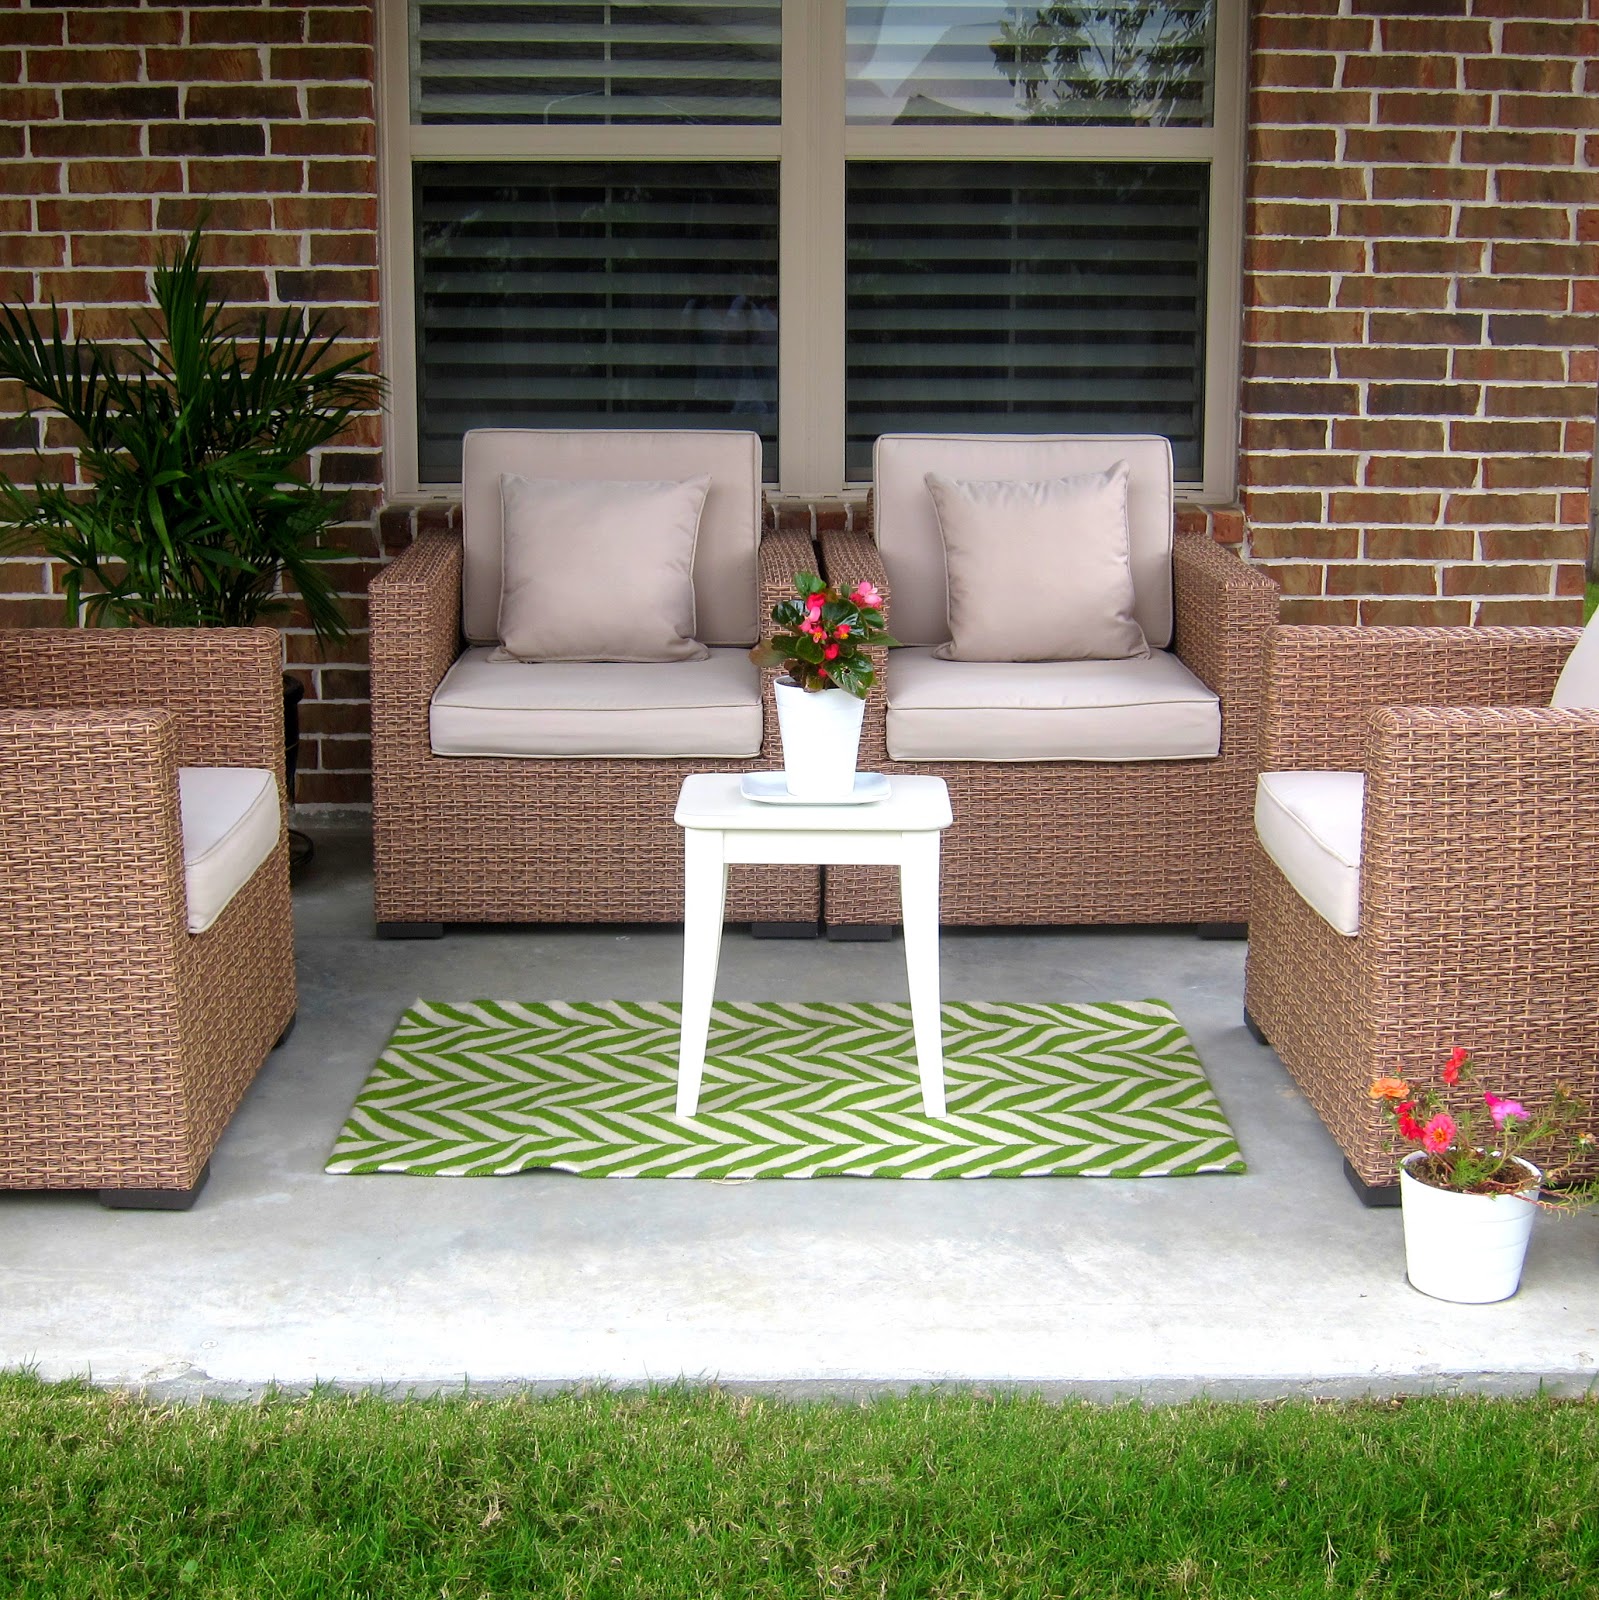 Patio rugs decor ideas patio rugs elegant wicker patio furniture with cushions and  chevron YCPBUZG